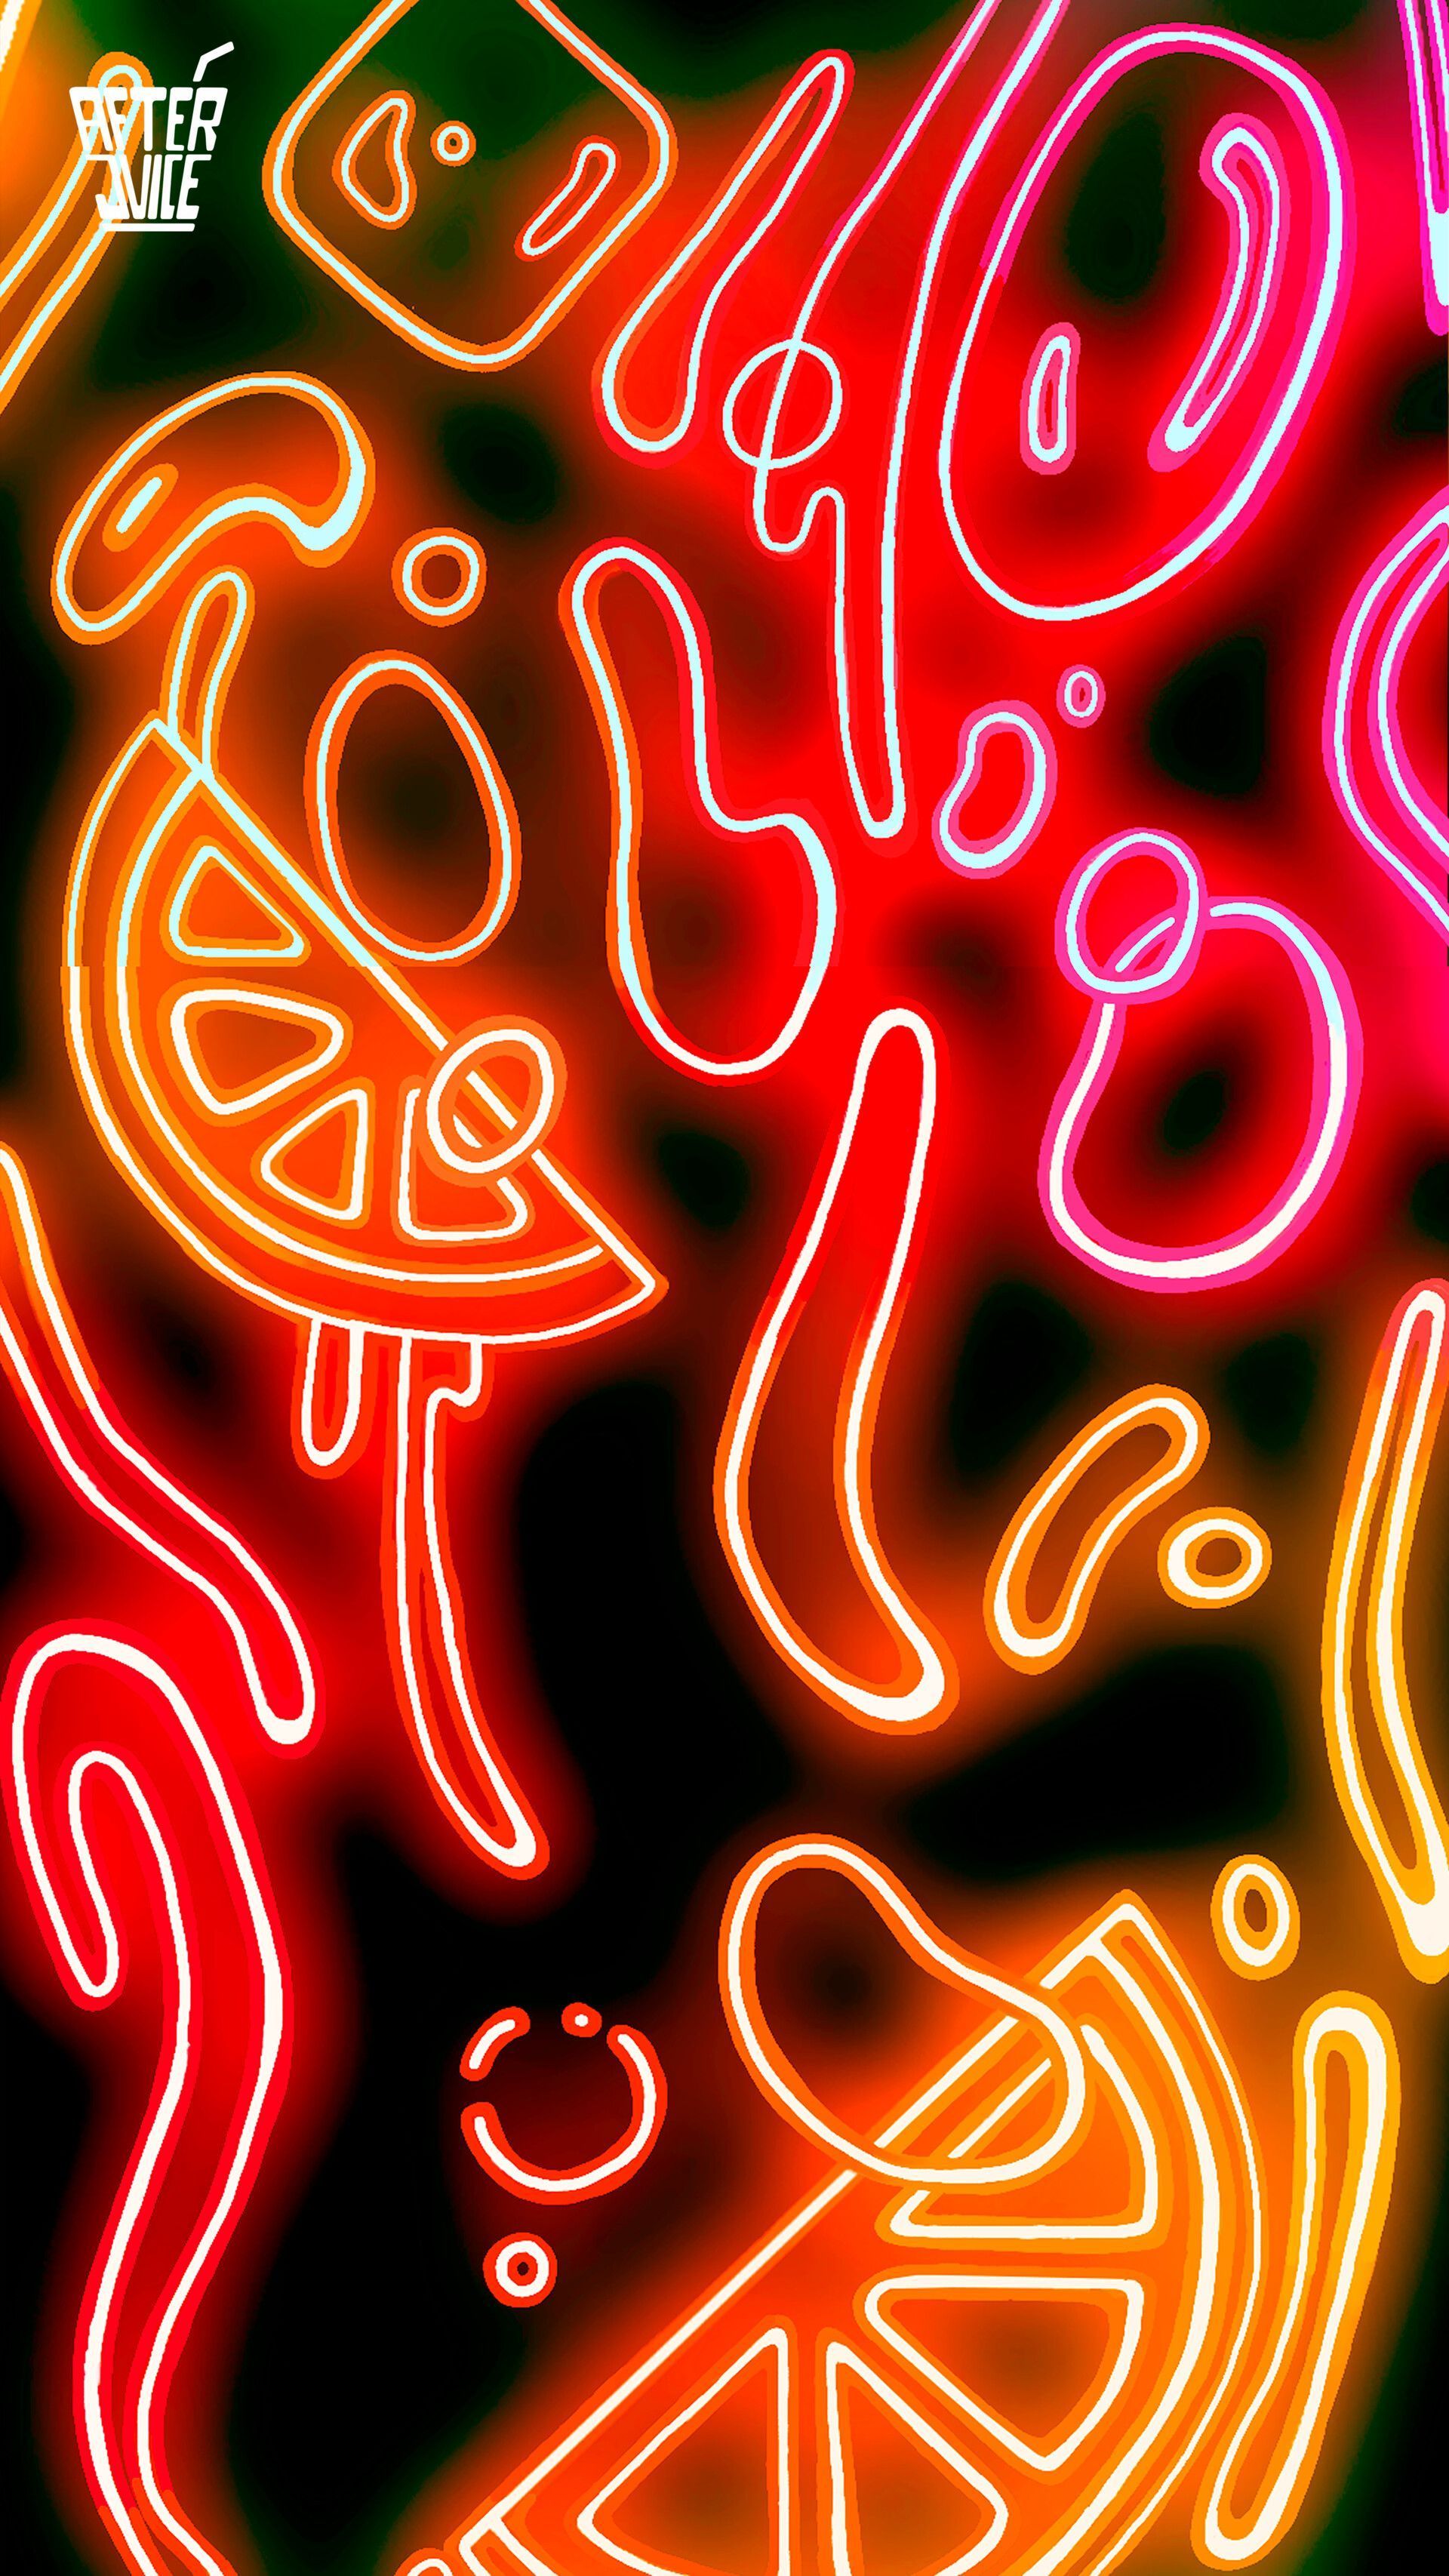 An abstract neon illustration of fruit and animals. - Neon orange